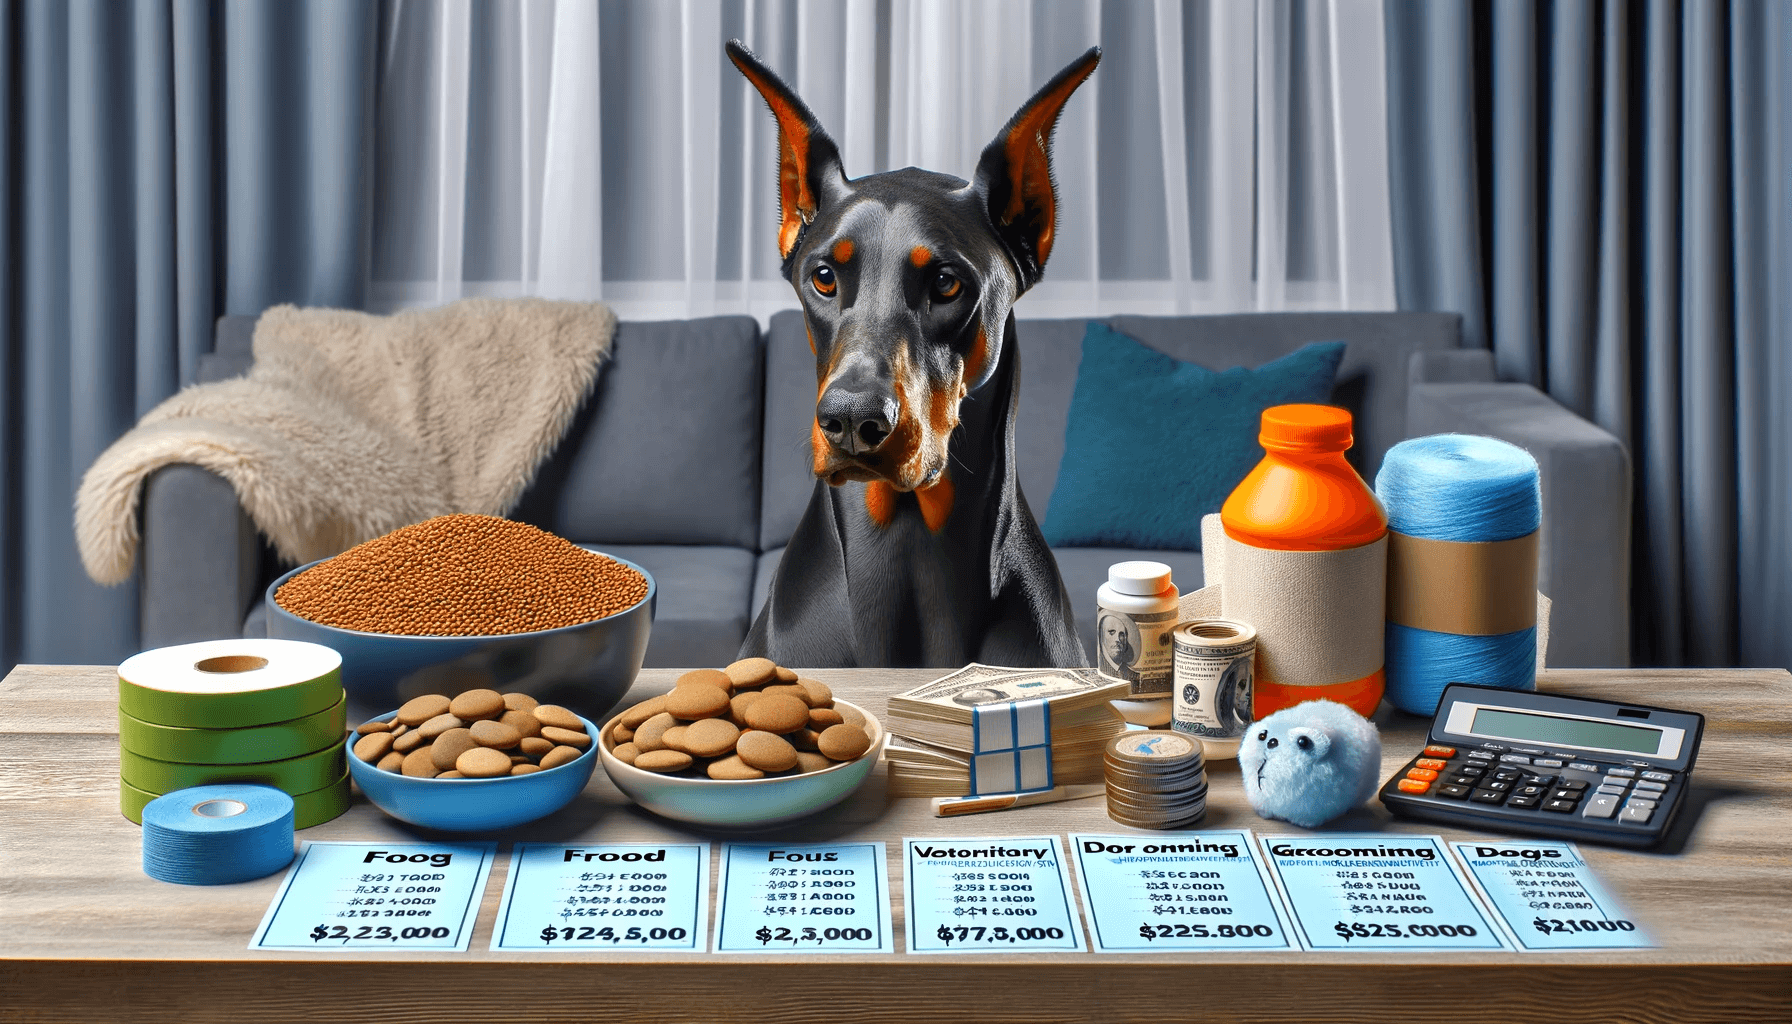 An image displaying a cost analysis of owning a Blue Doberman, providing information on expenses associated with the breed.